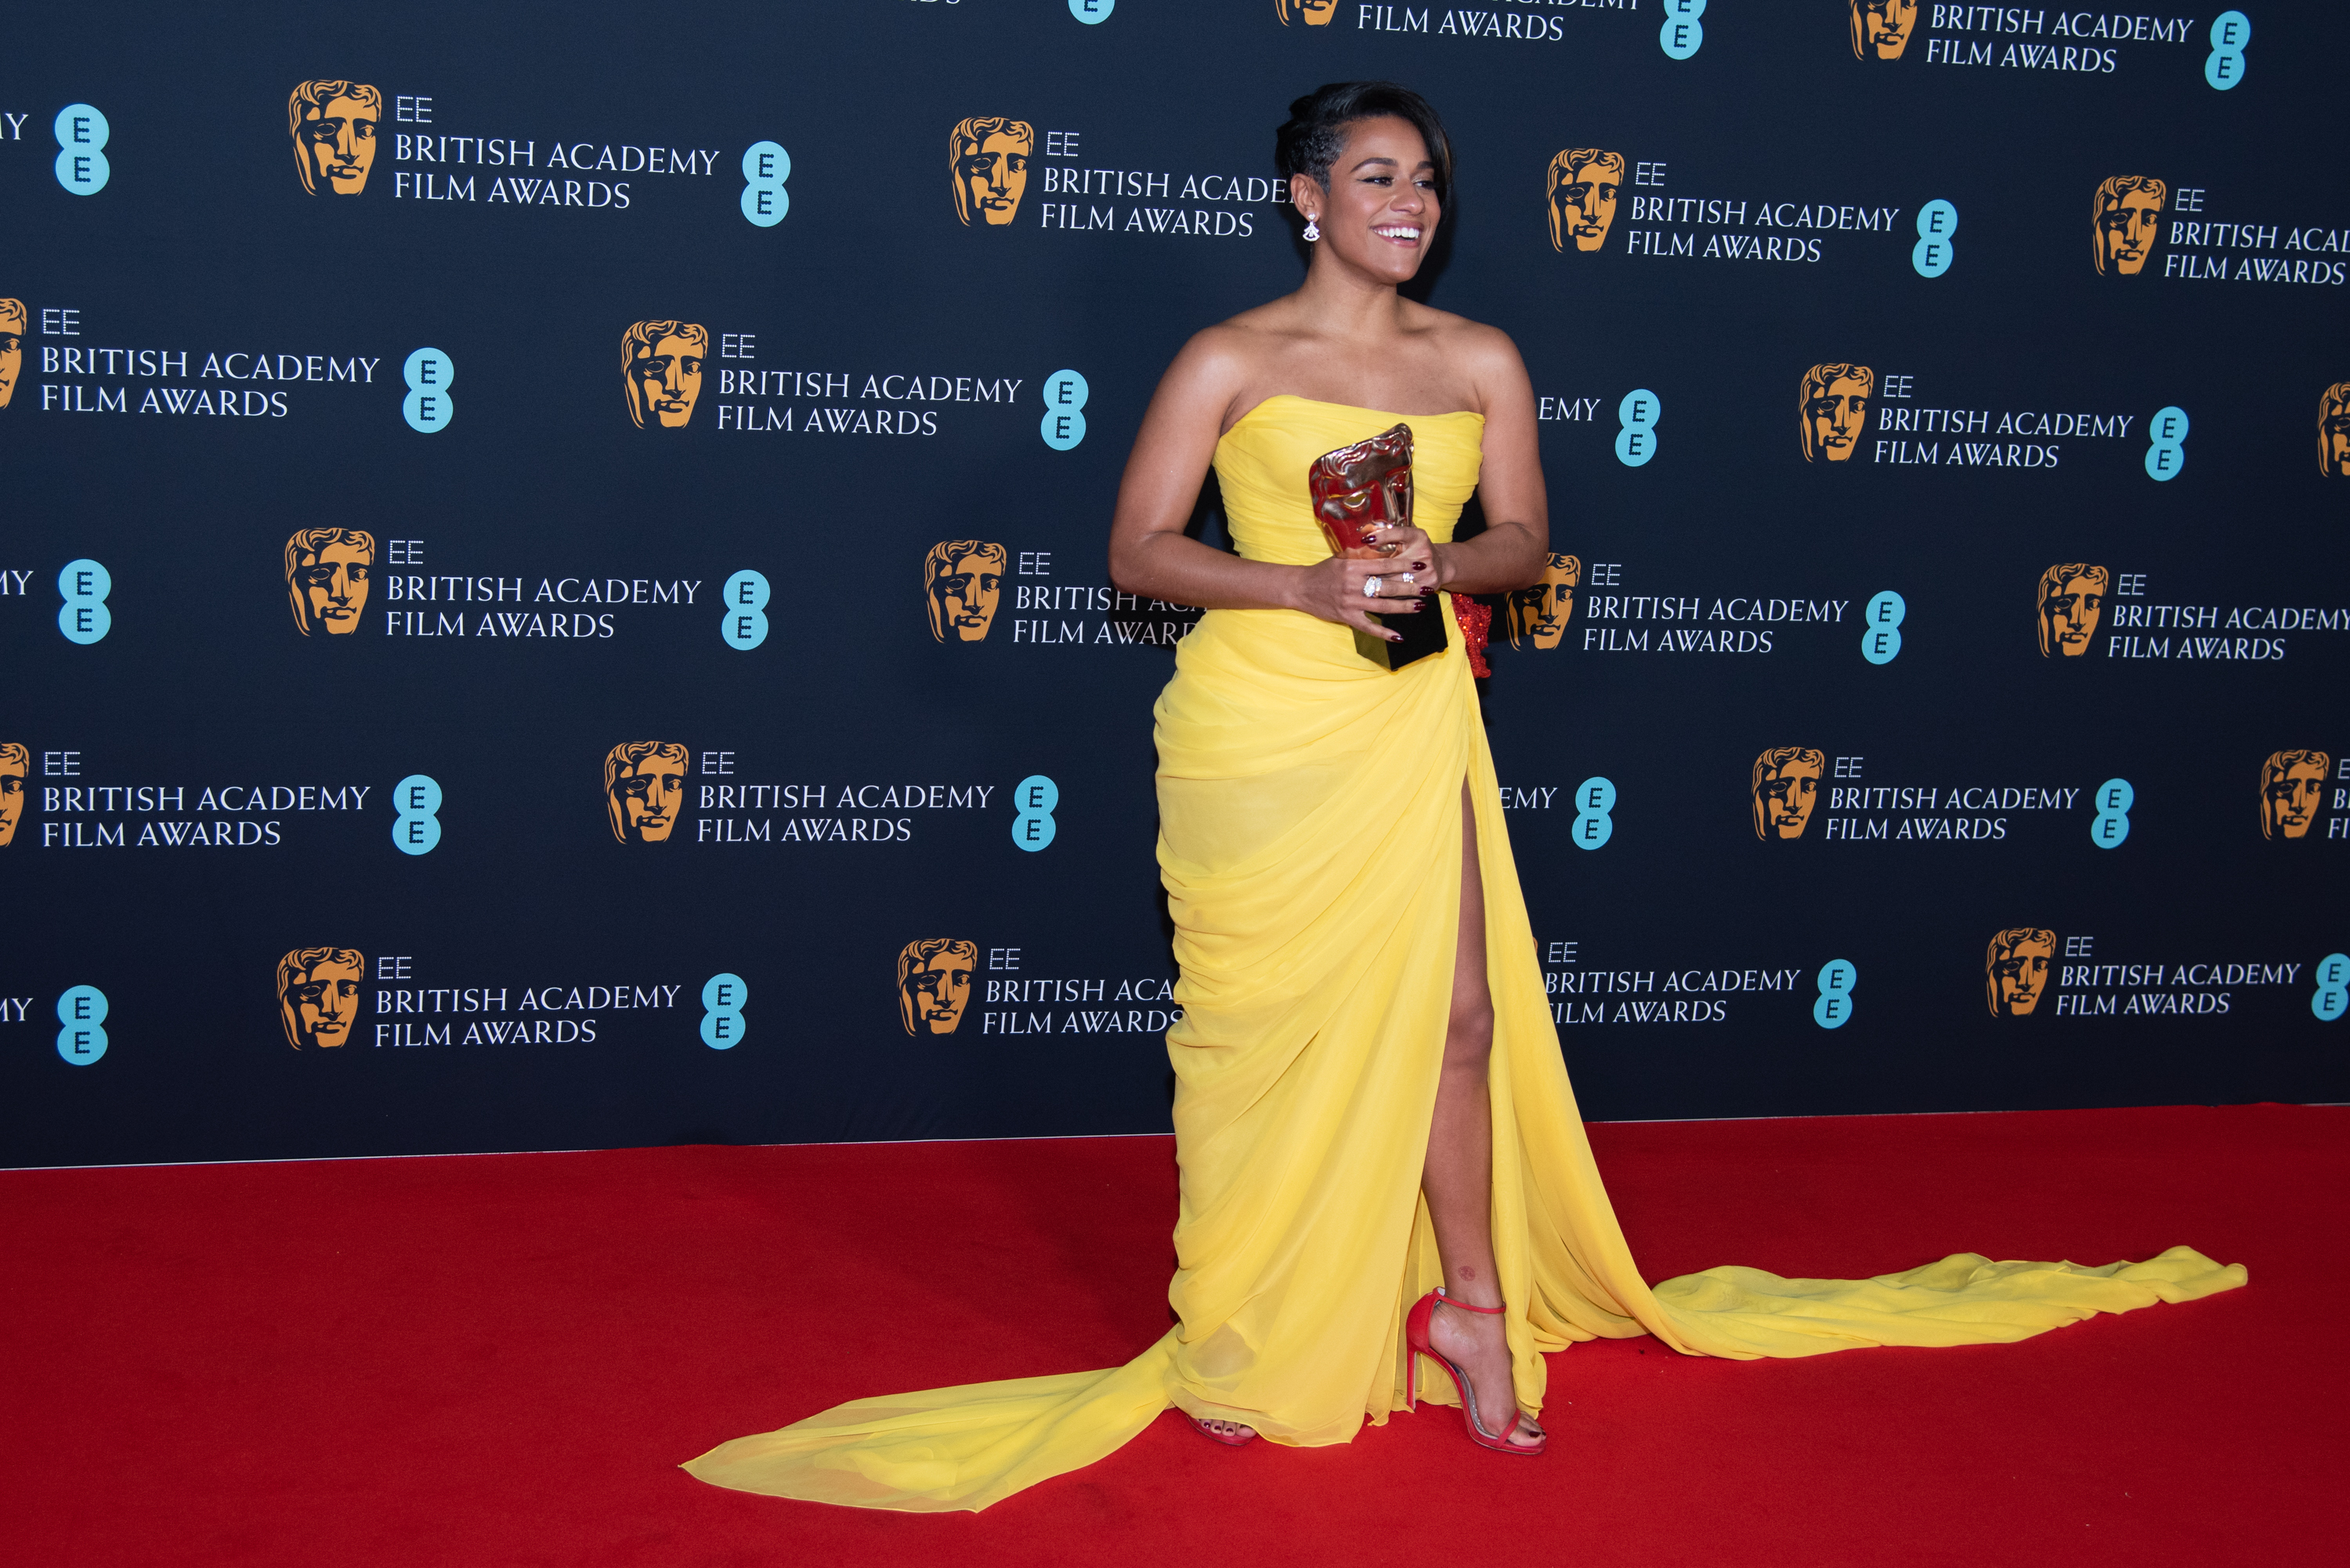 Ariana DeBose attends the EE British Academy Film Awards 2022 dinner red carpet arrivals at The Grosvenor House Hotel in London, England on March 13, 2022.